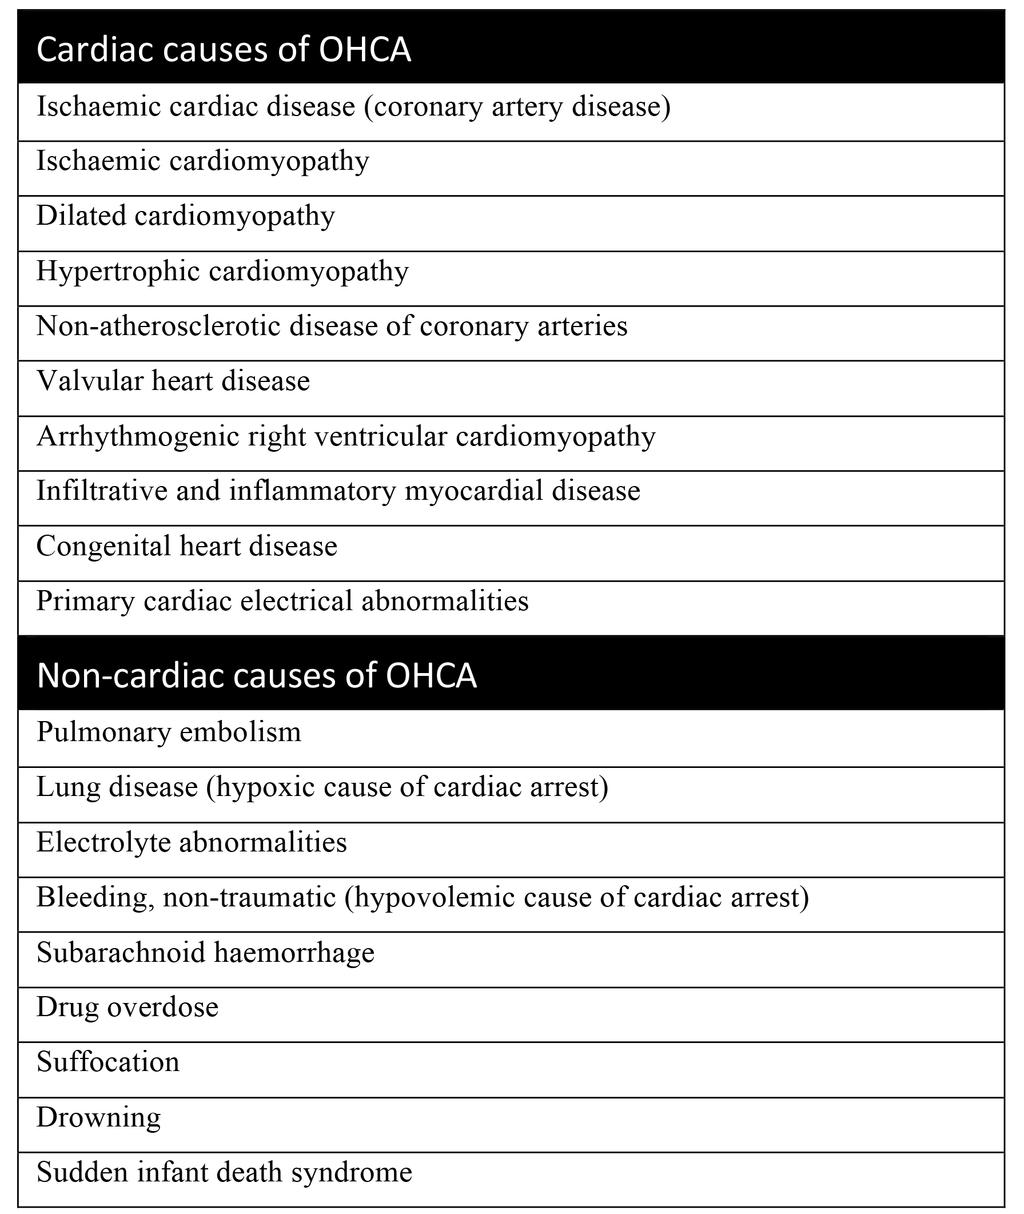 Table 1. Causes of OHCA divided into cardiac and non-cardiac origin. Adapted from Hollenberg et al., 2013 